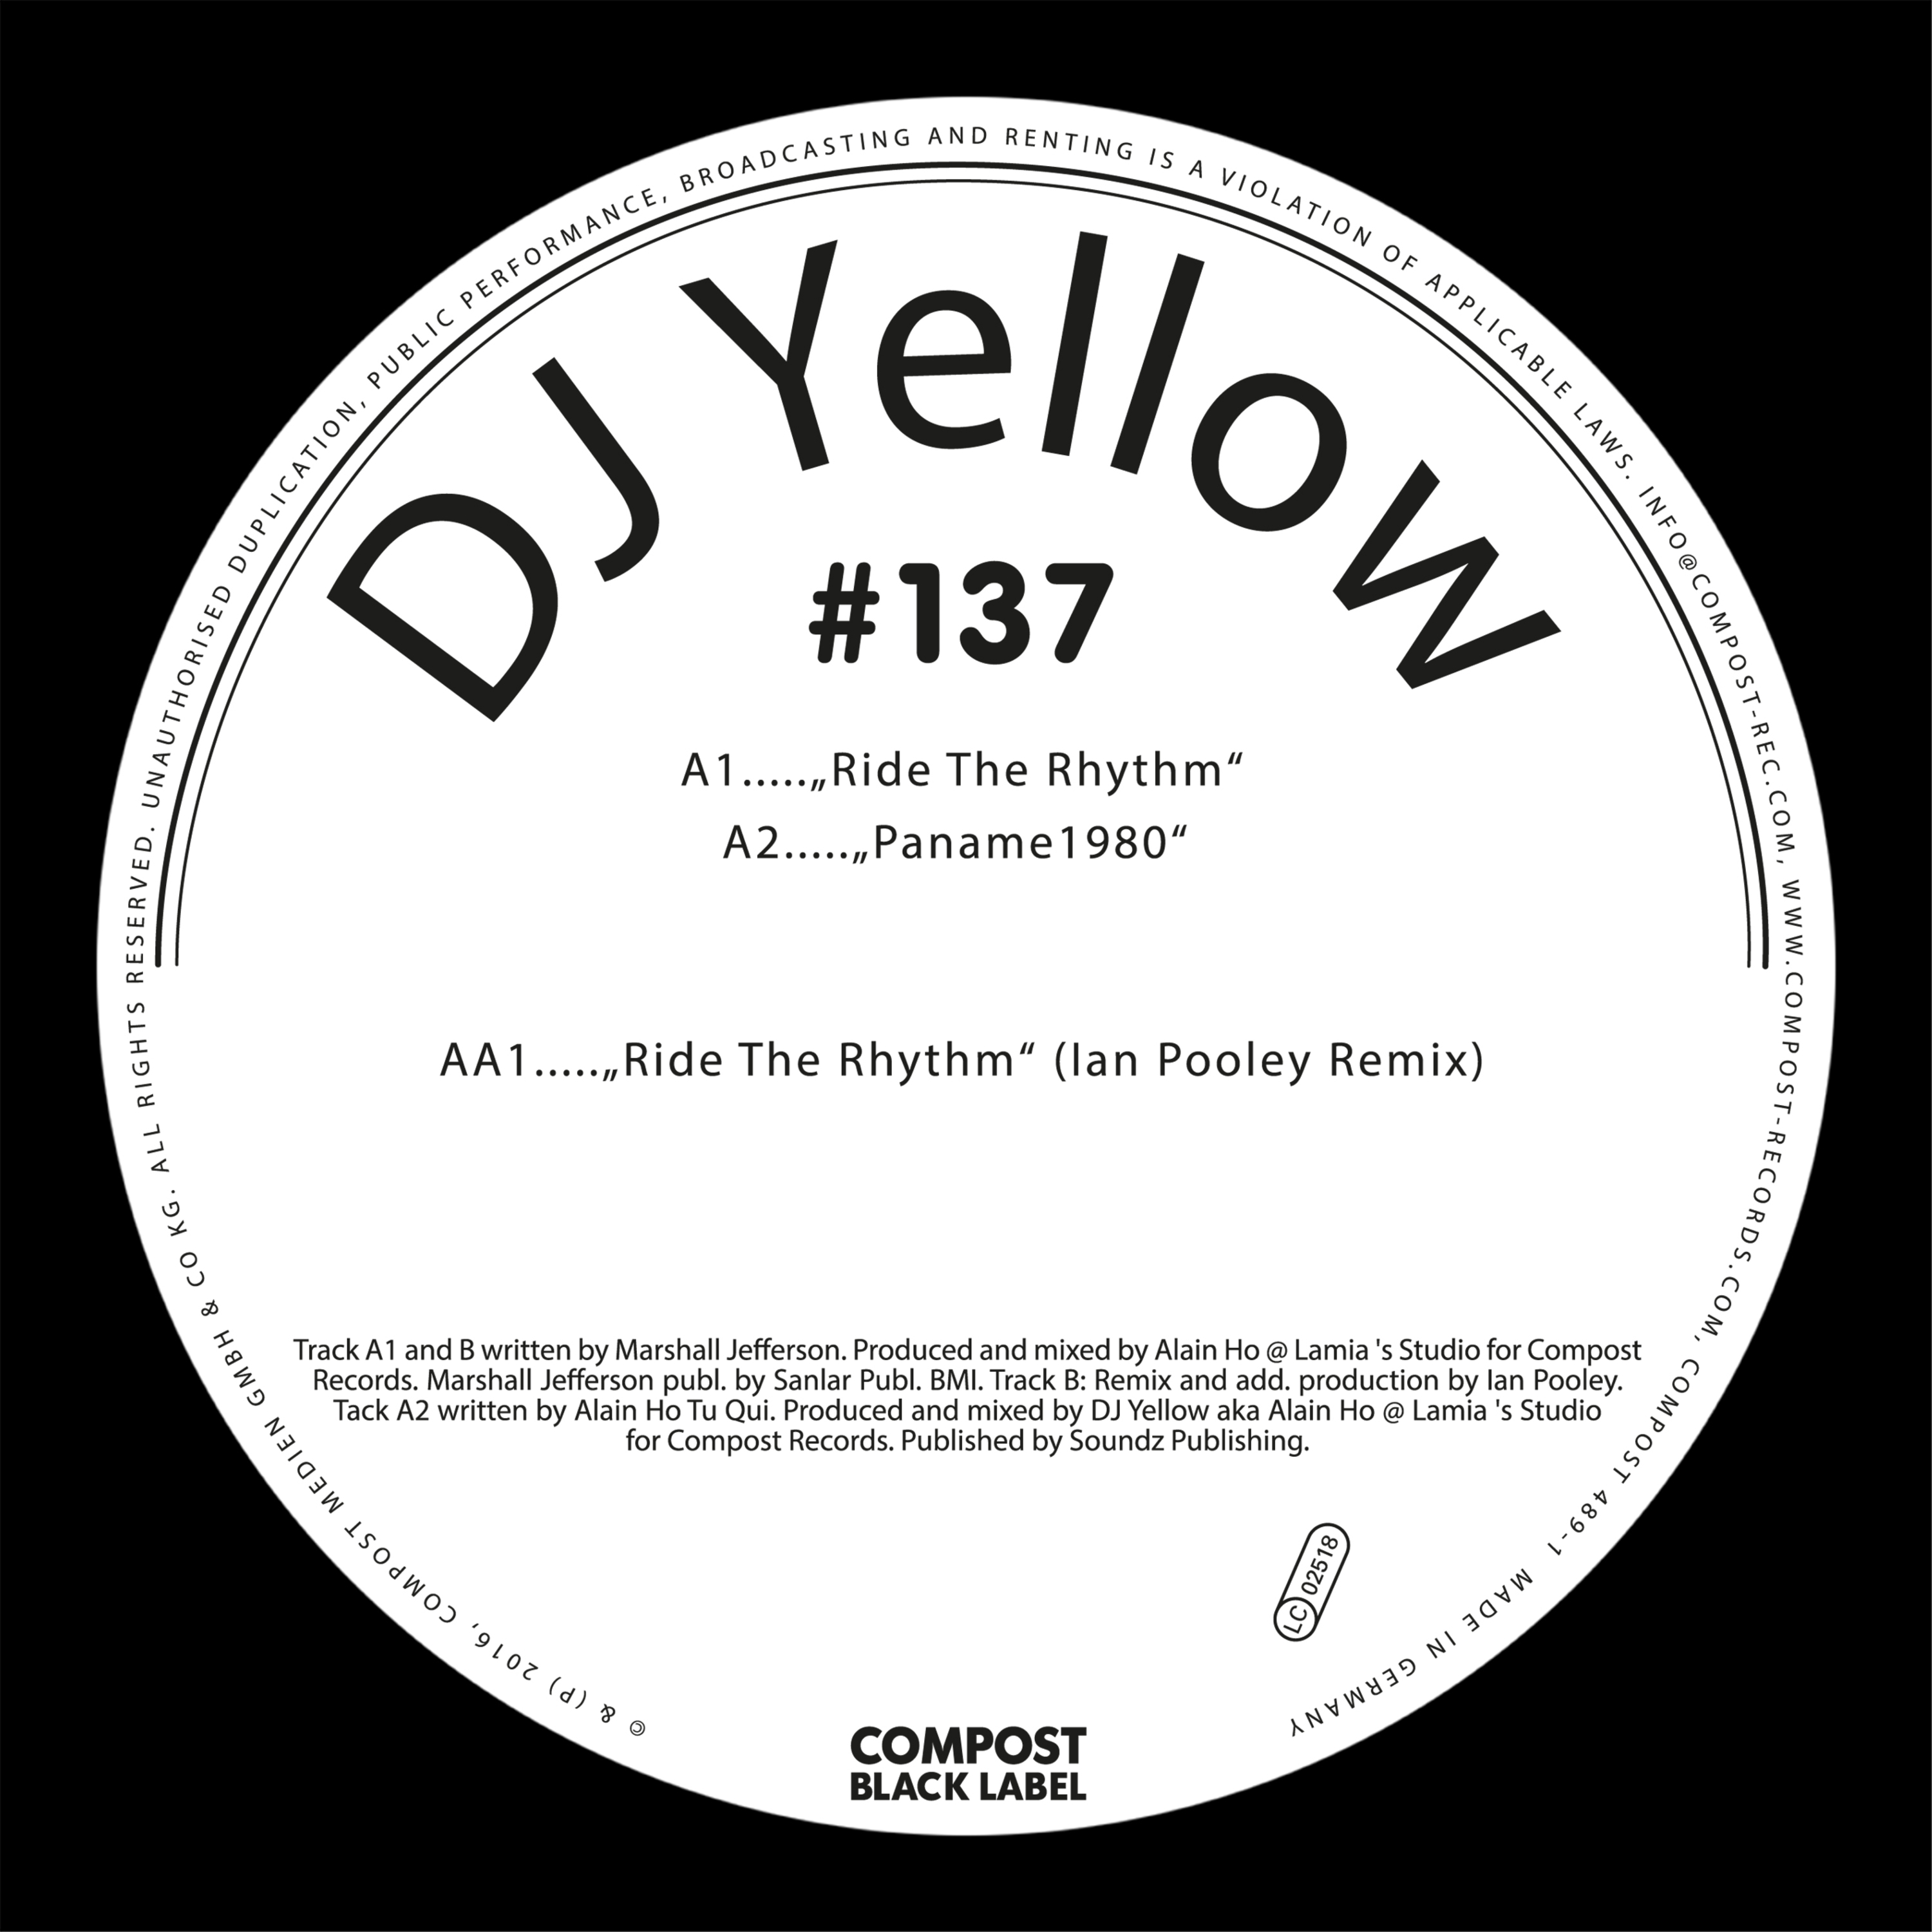 Ride the Rhythm EP incl. Ian Pooley Remix - Compost Black Label #137